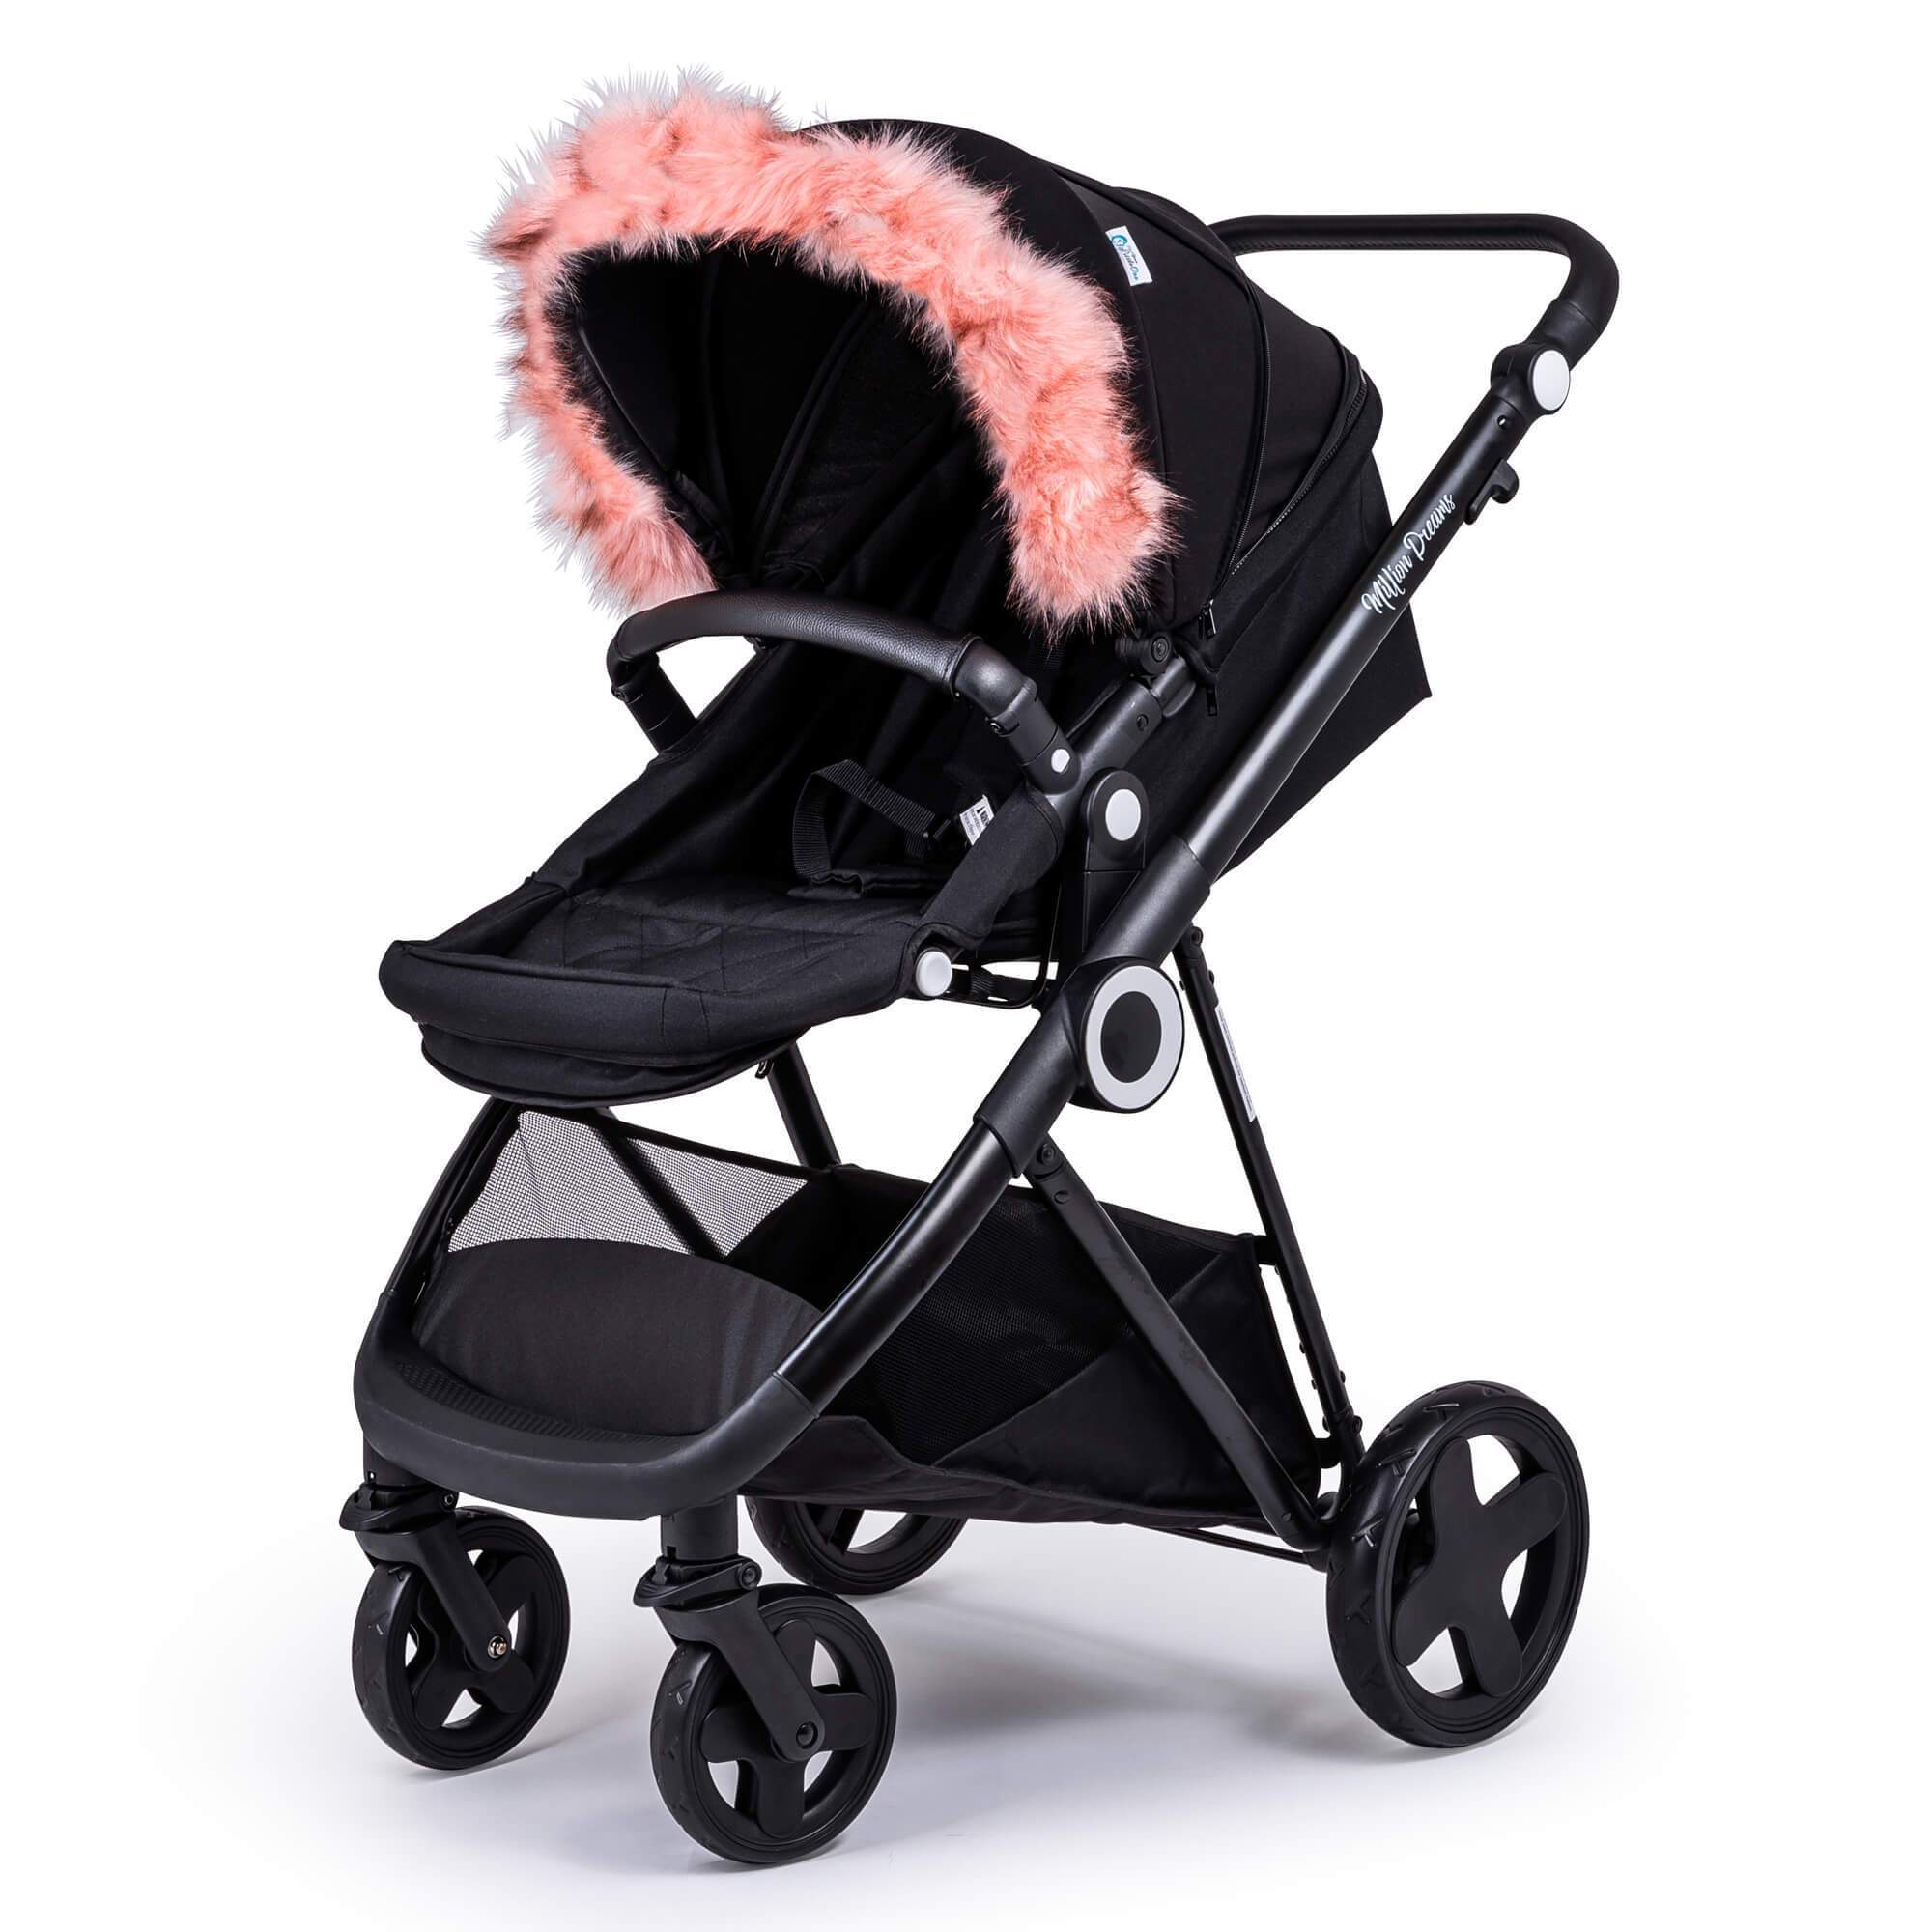 Pram Fur Hood Trim Attachment for Pushchair Compatible with Babylo - Pink / Fits All Models | For Your Little One